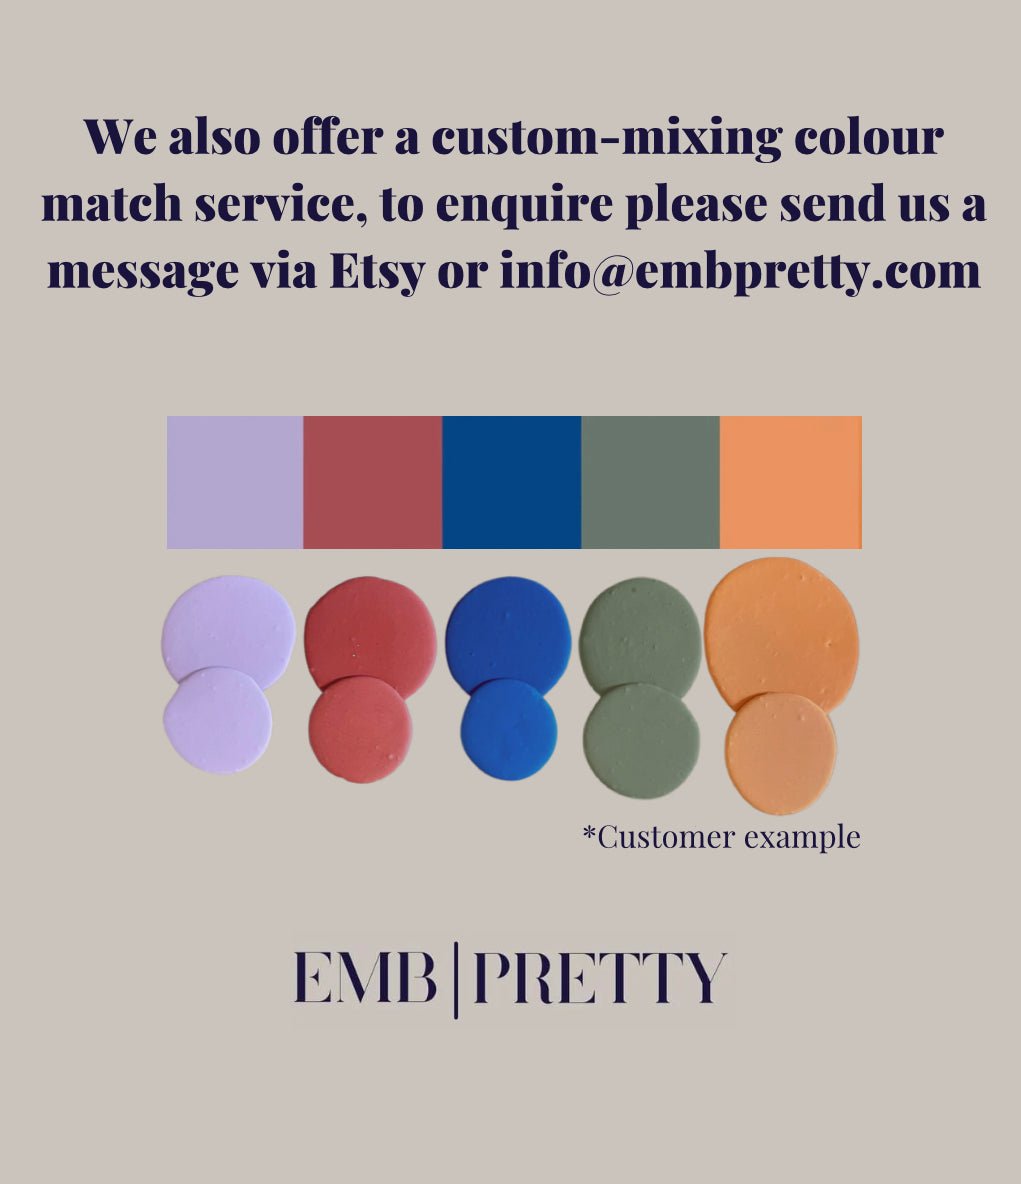 30ml Hand-blended pigments - EMB Pretty